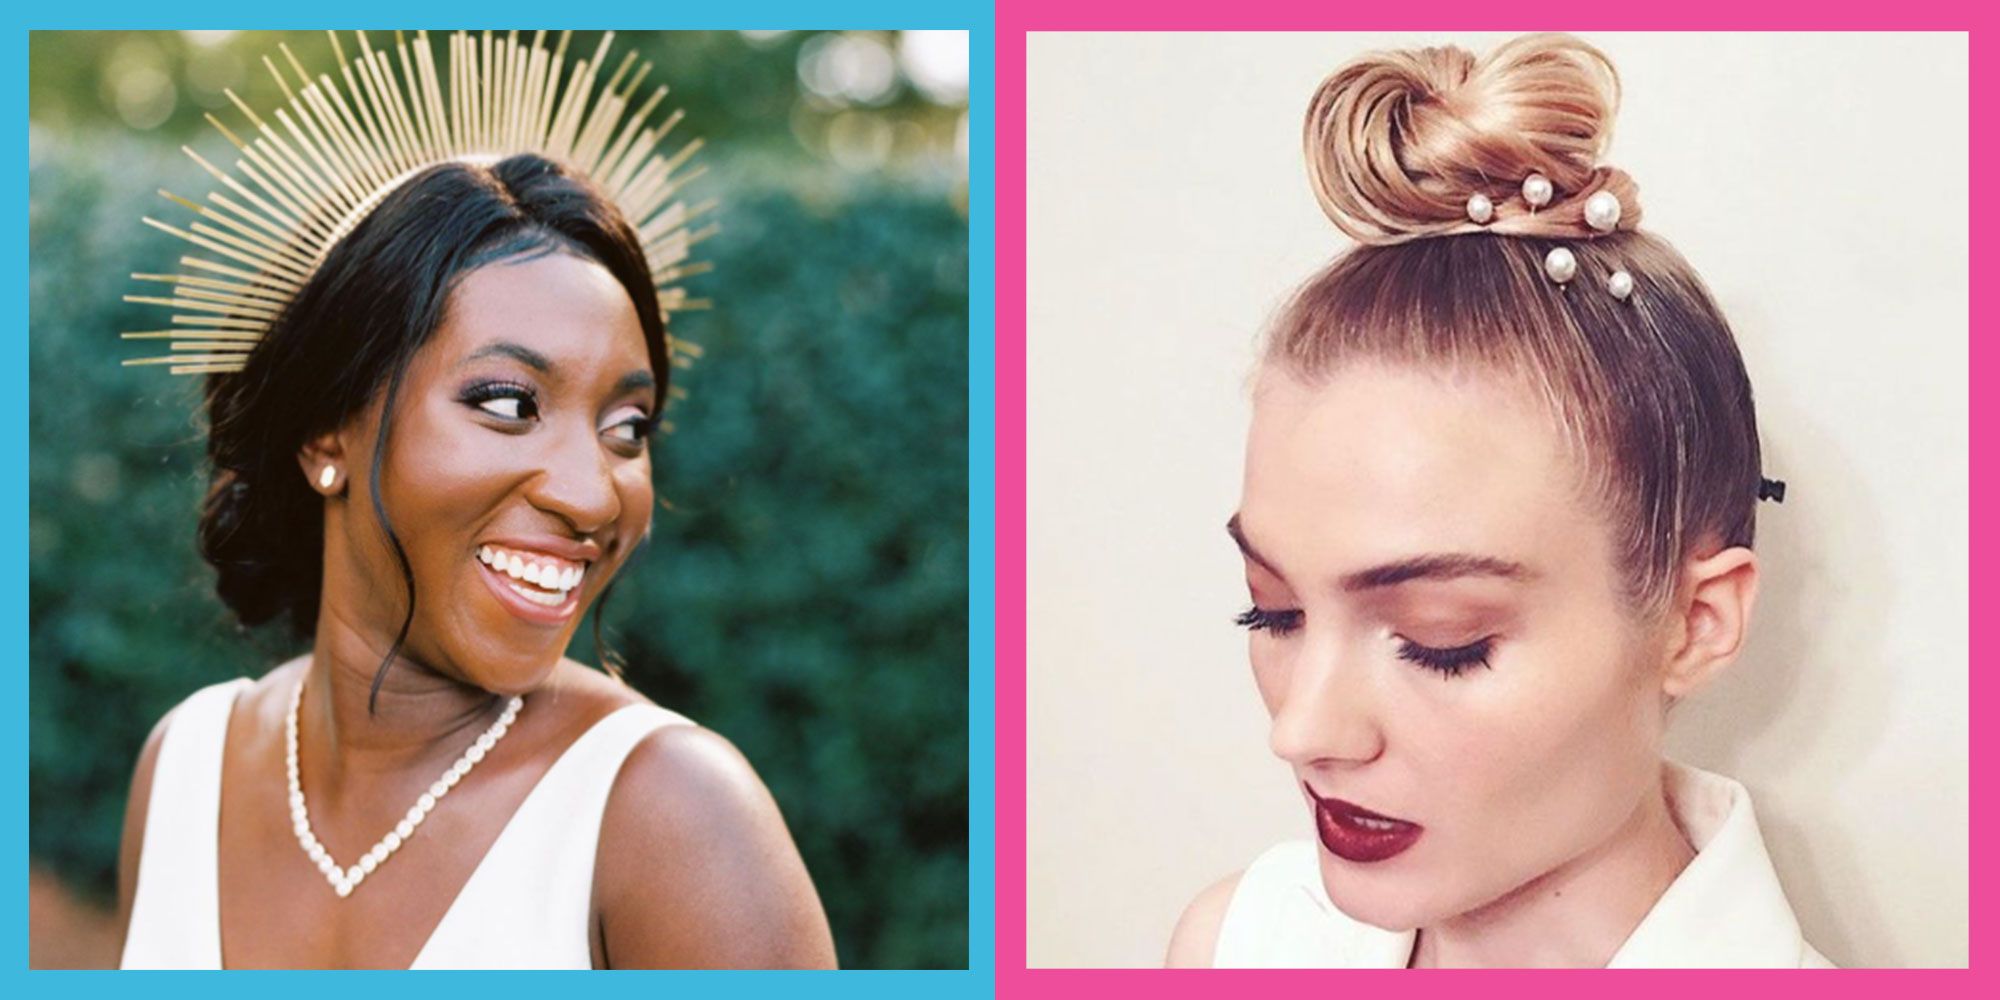 30 Bridal Hairstyles For Long And Straight Hair Messy Buns To Braids To  Slay Your Wedding Look